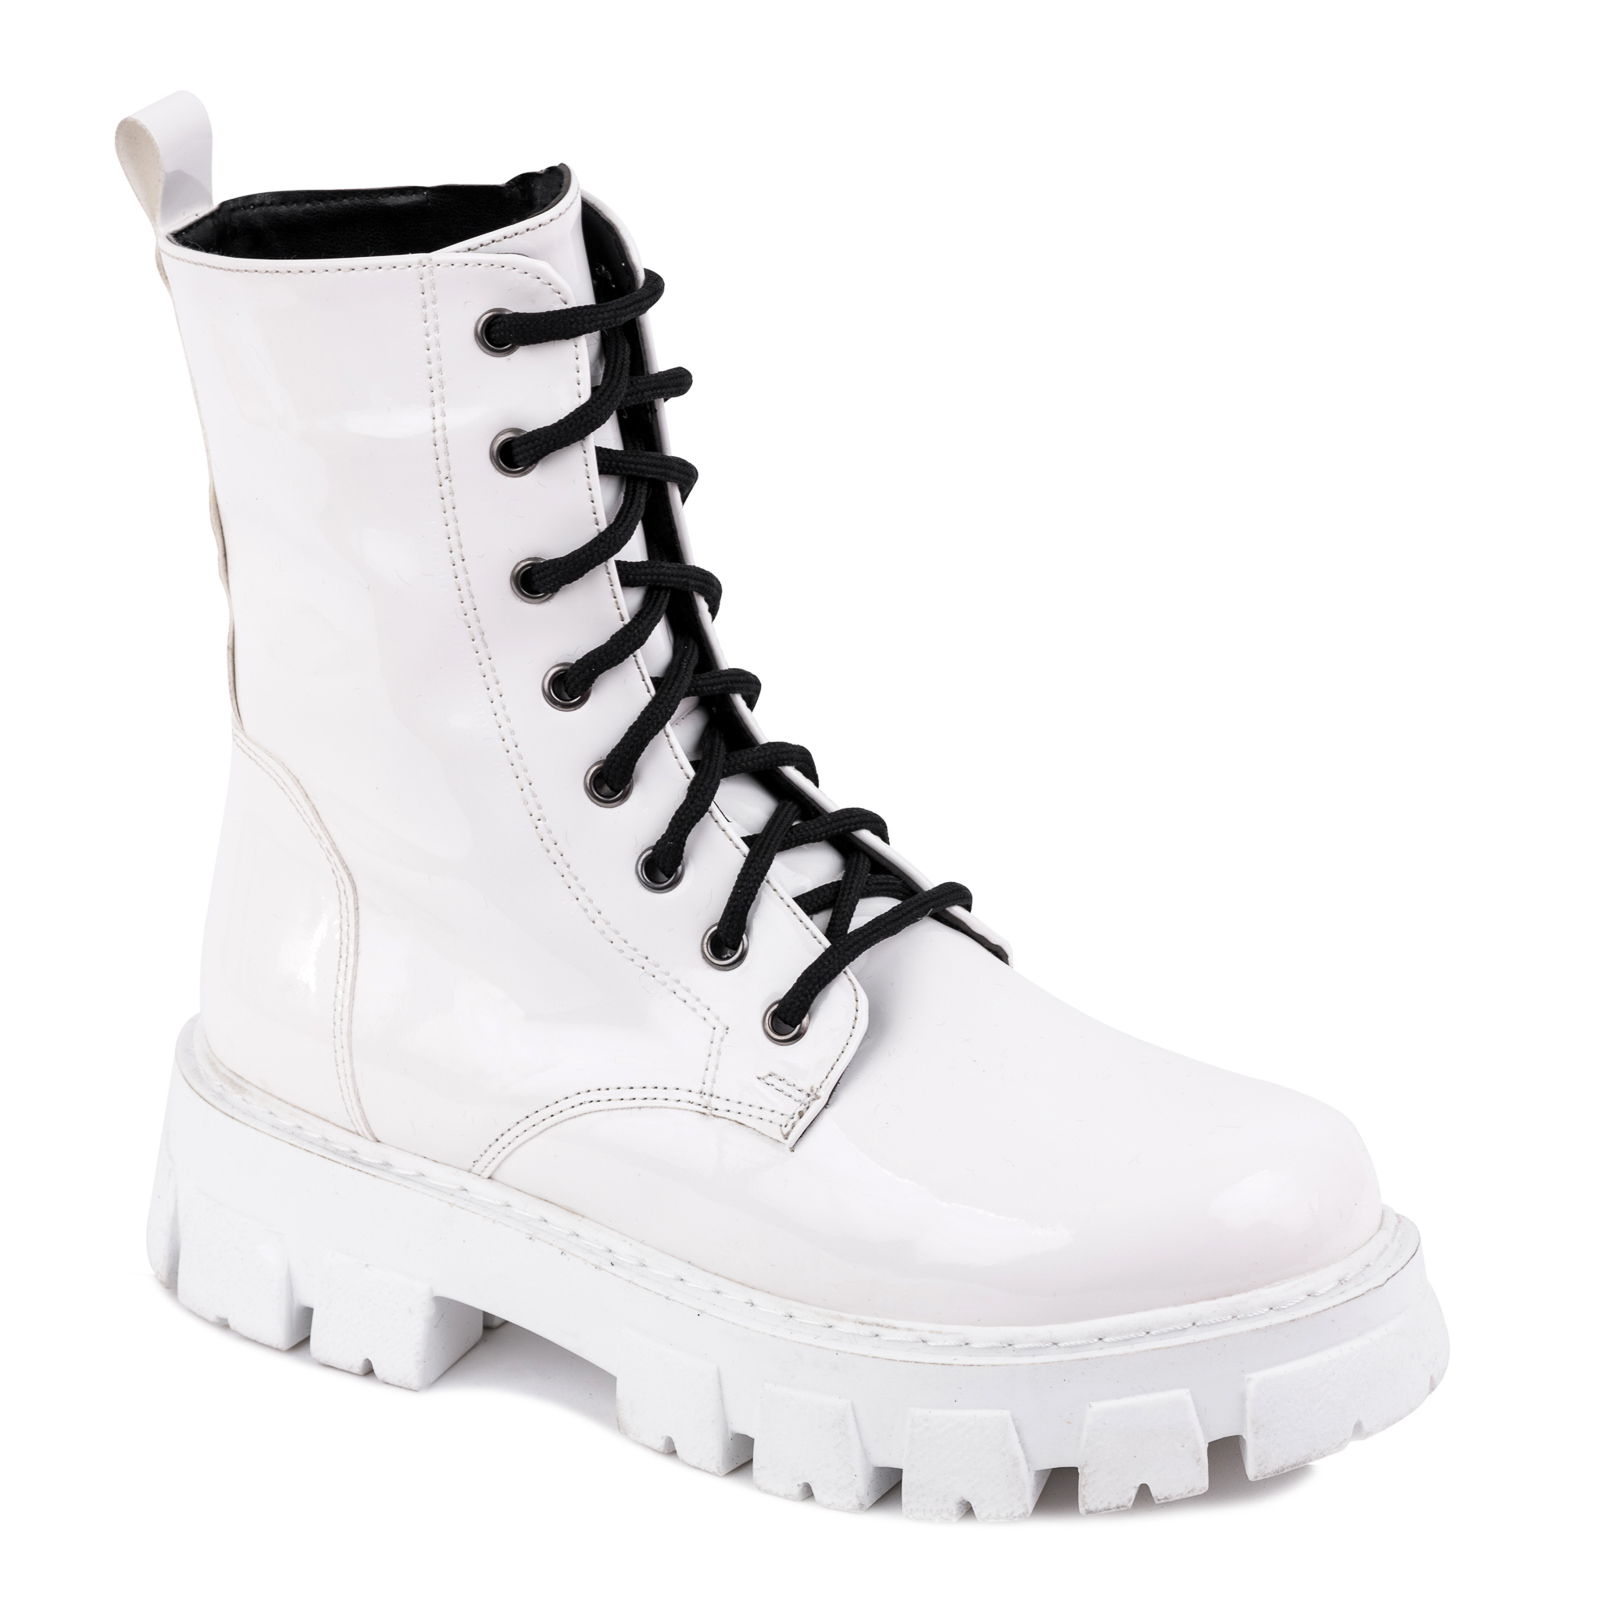 PATENT MARTIN BOOTS WITH BLACK LACES - WHITE